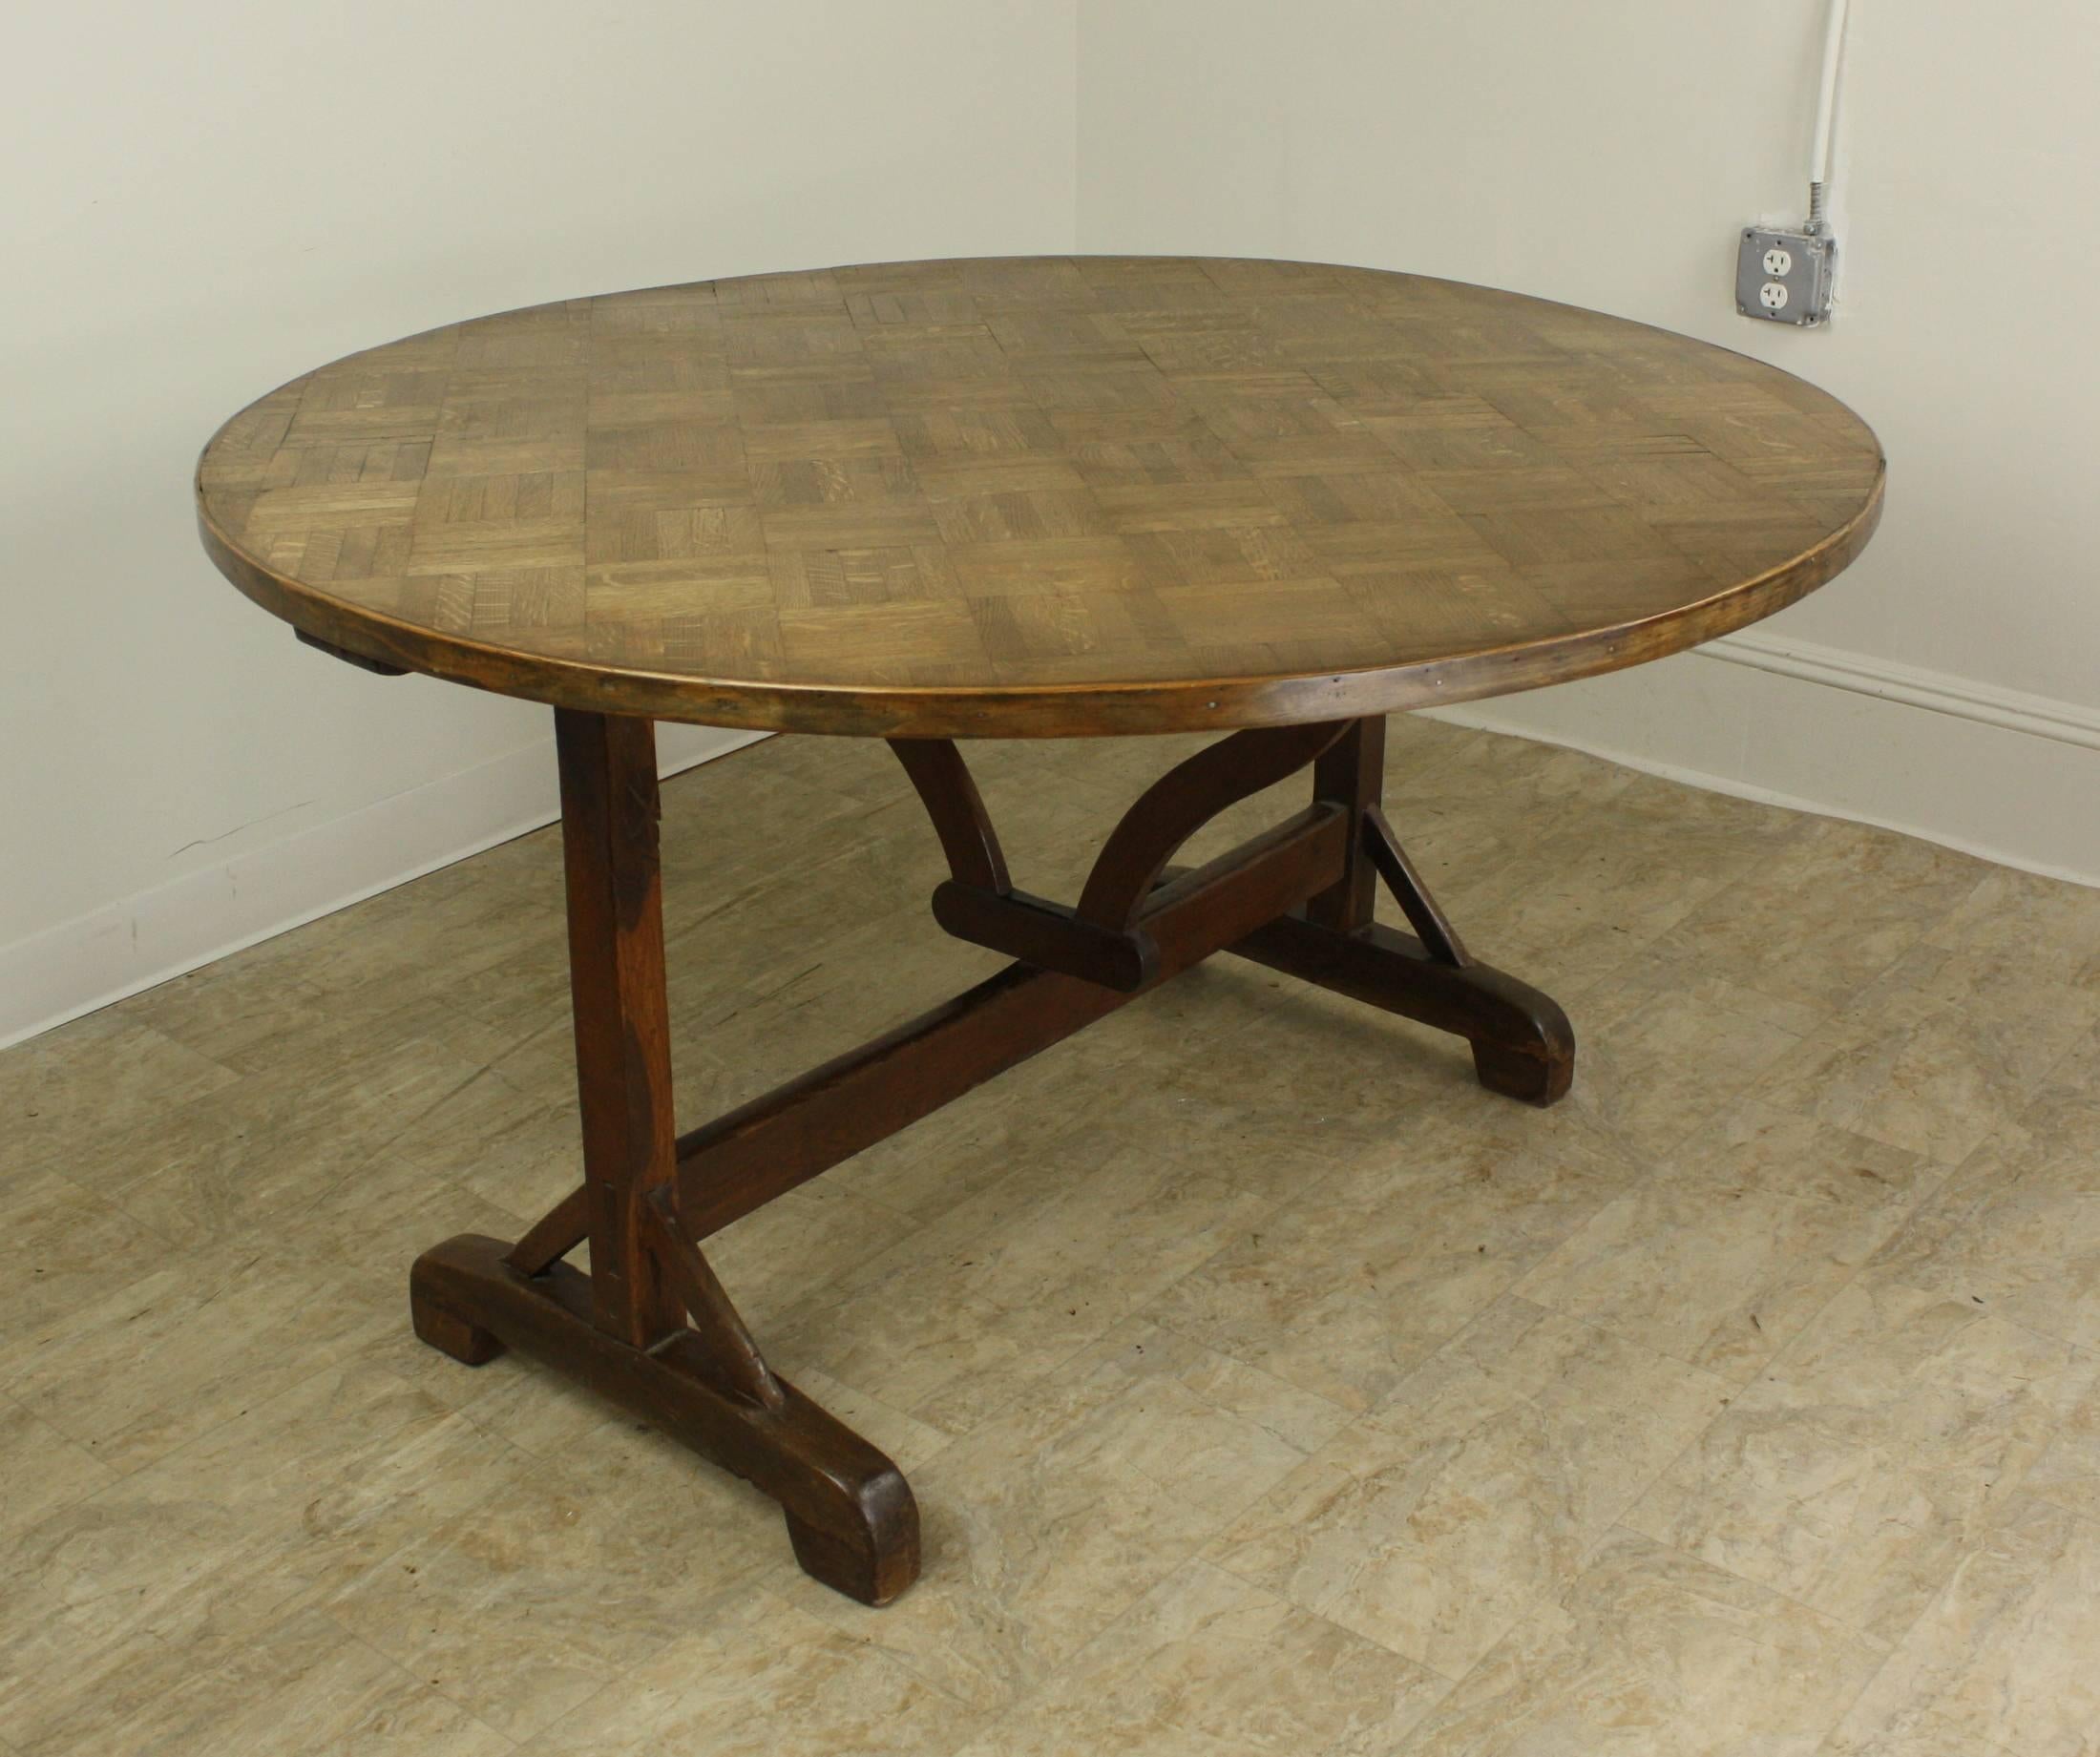 This round tilt top table has an unusual and very lovely parquet top, lightly waxed for contrast but otherwise unparalleled in its natural beauty. Pretty decorative band around the top. The harp base, well colored and with good shine and patina,